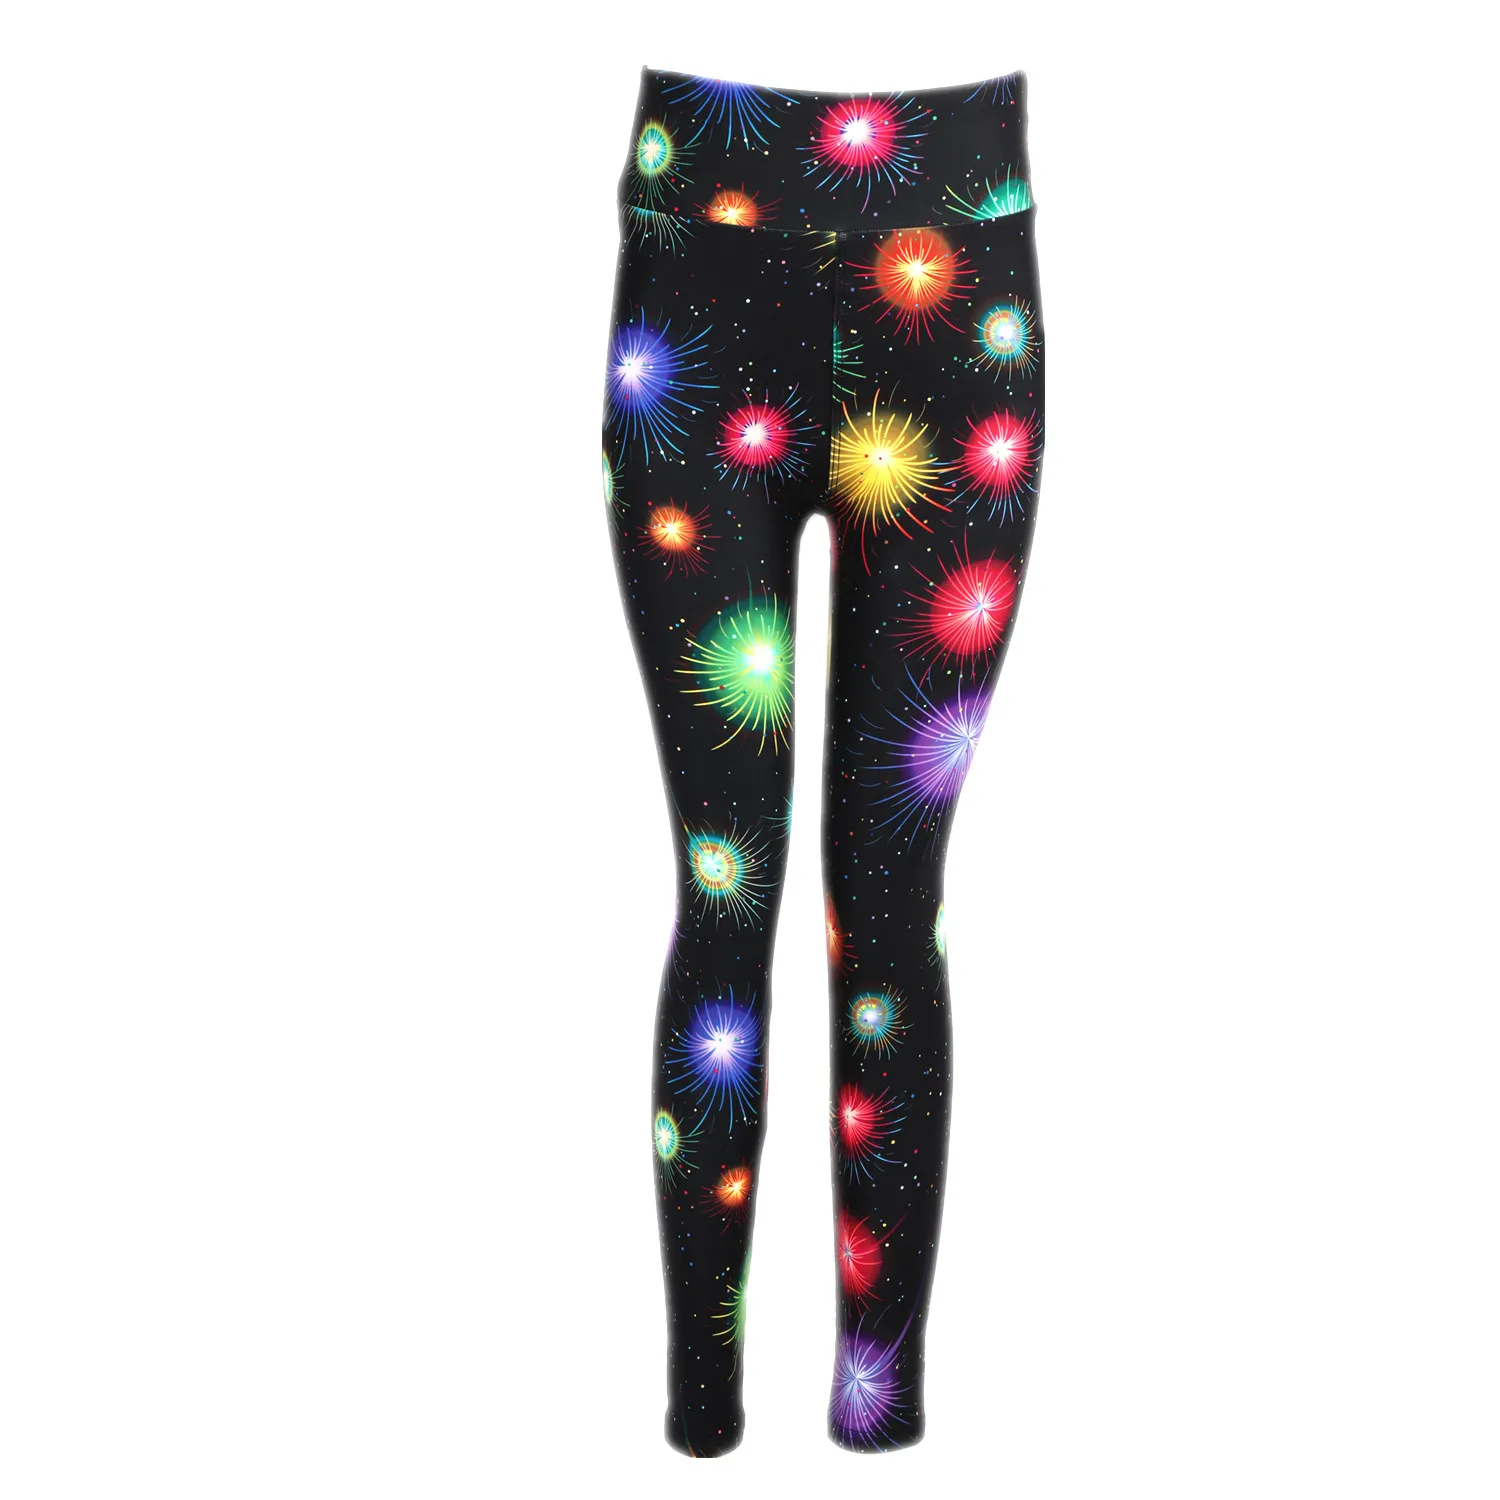 

Wholesale 92/8 polyester spandex high quality stretch pants buttery soft women girls holidays magic fireworks black leggings, Customized colors